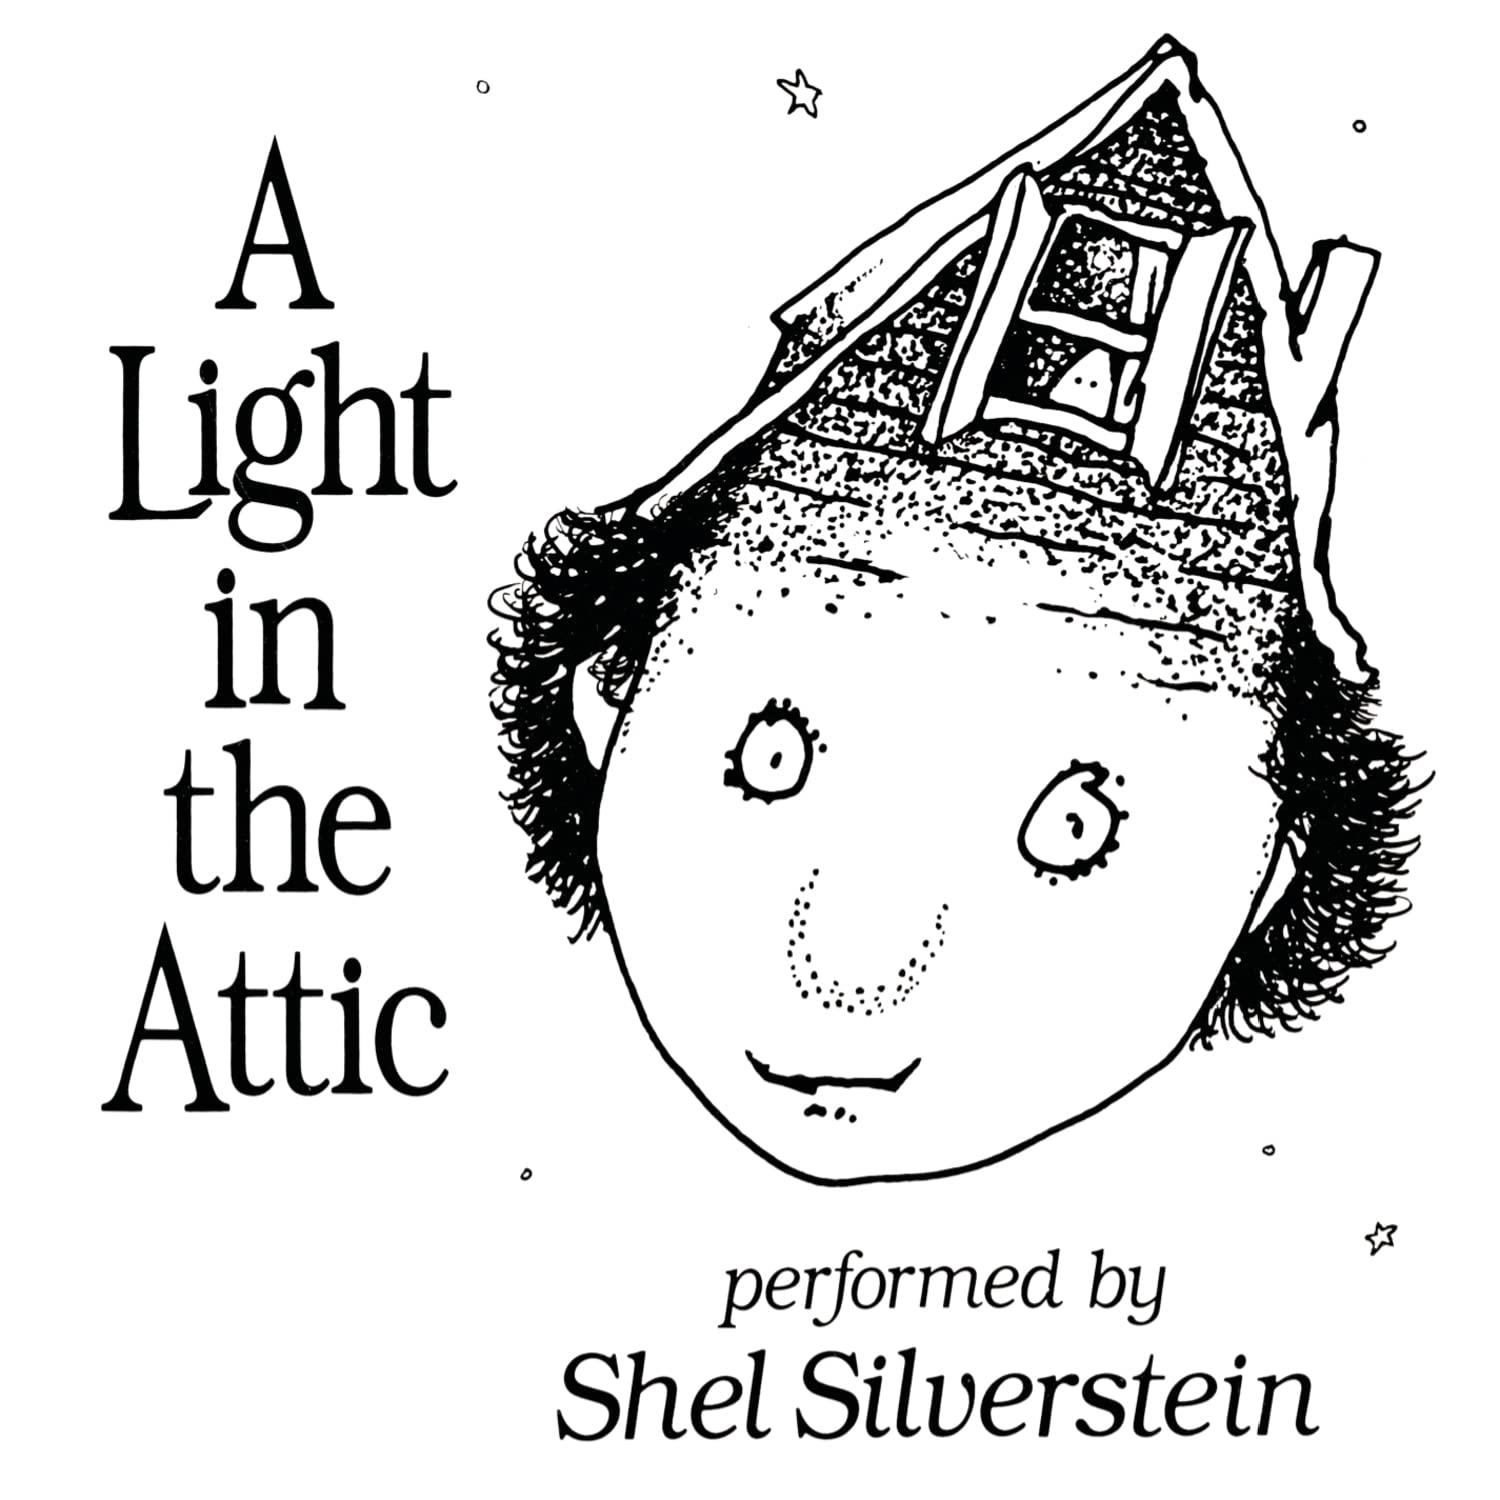 a light in the attic banned